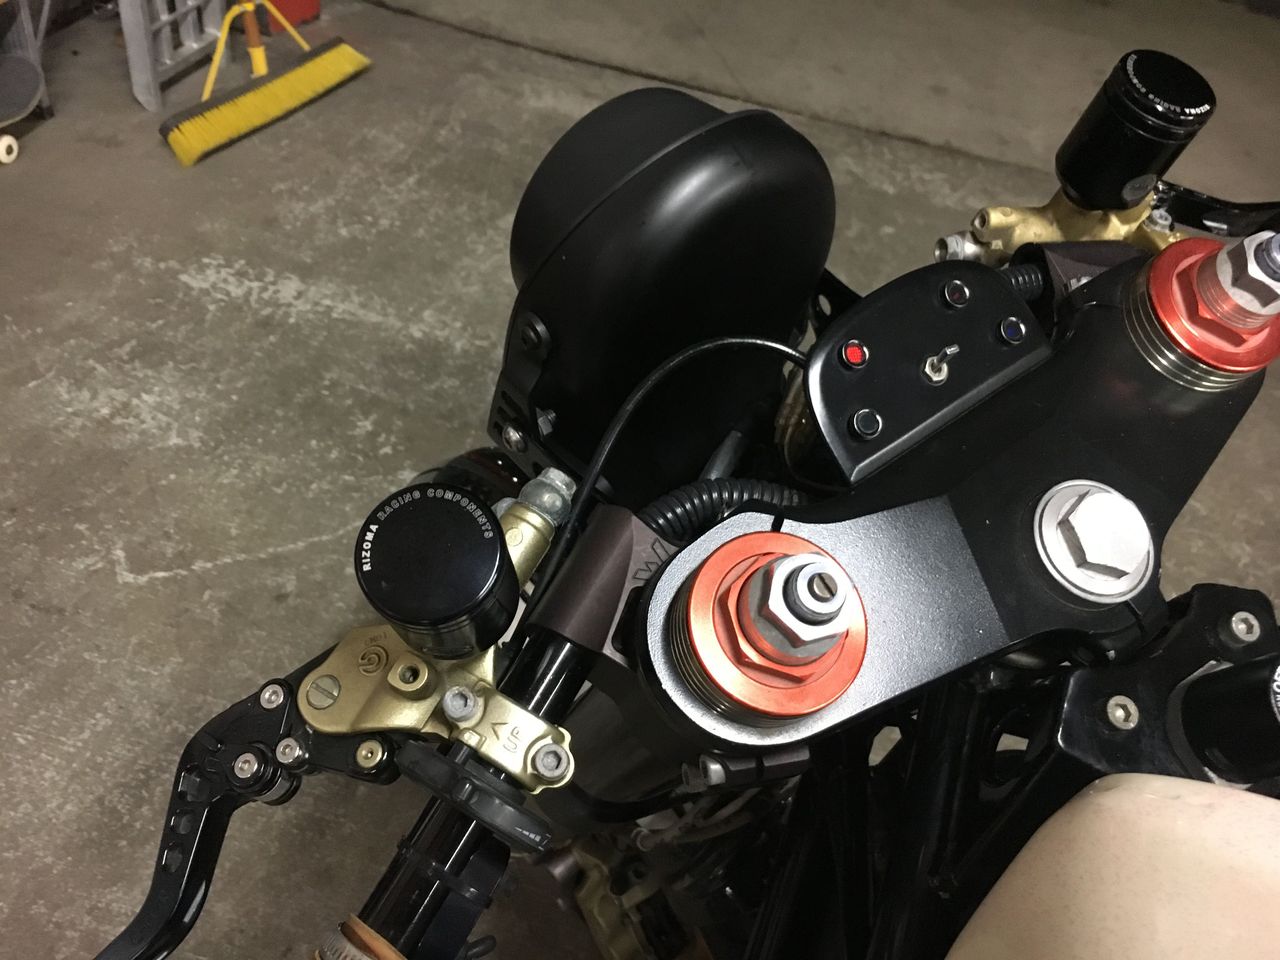 While it's extremely subtle, the high/low beam, neutral, signal, oil indicator lights are custom and sit flush in the Triple tree. A fantastically executed mod